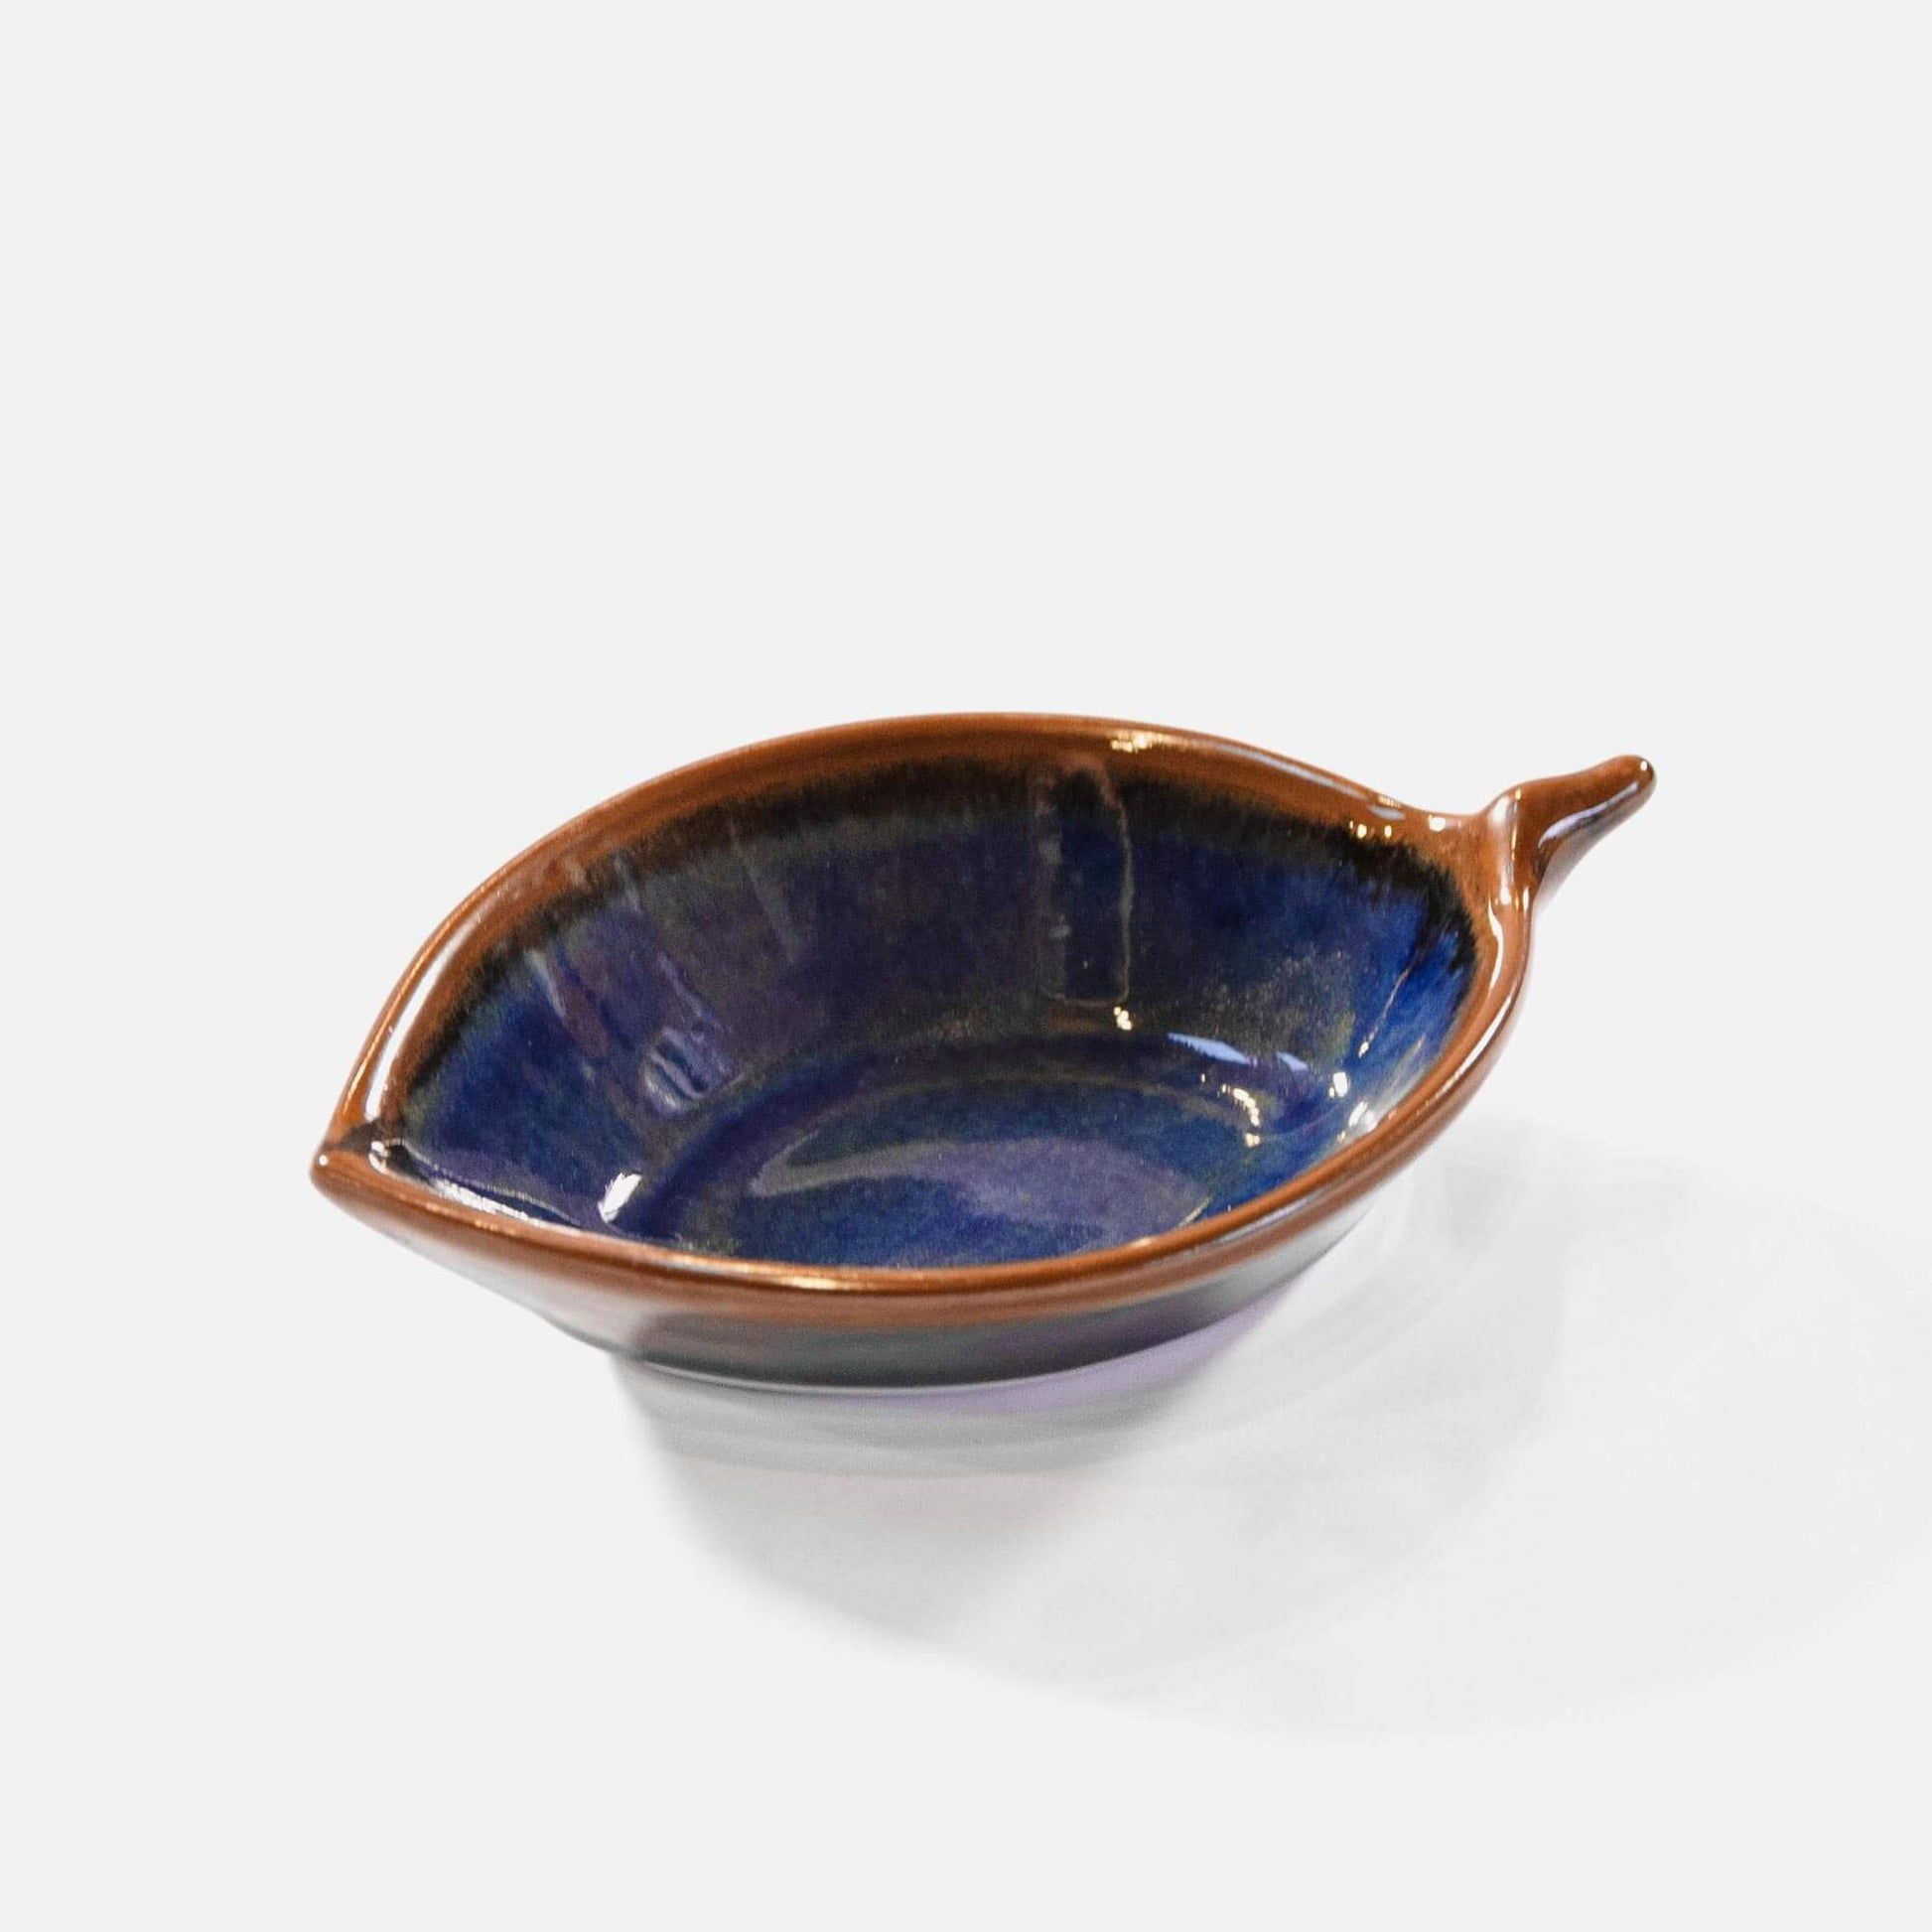 Handmade Pottery Leaf Dish in Blue Hamada made by Georgetown Pottery in Maine